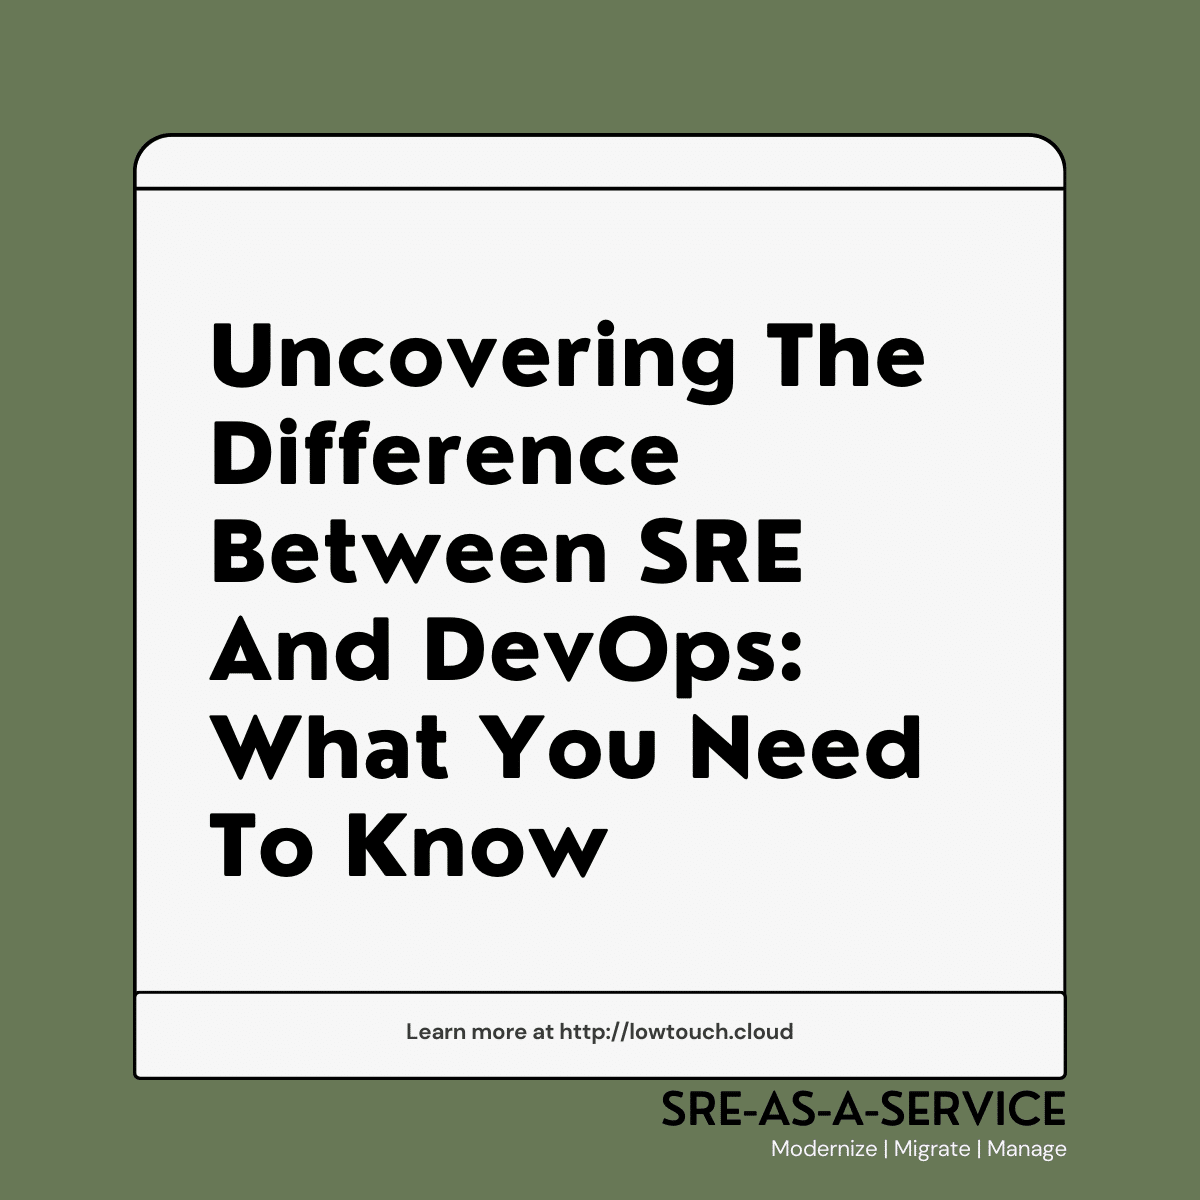 Uncovering the difference between SRE and DevOps: What you need to know.